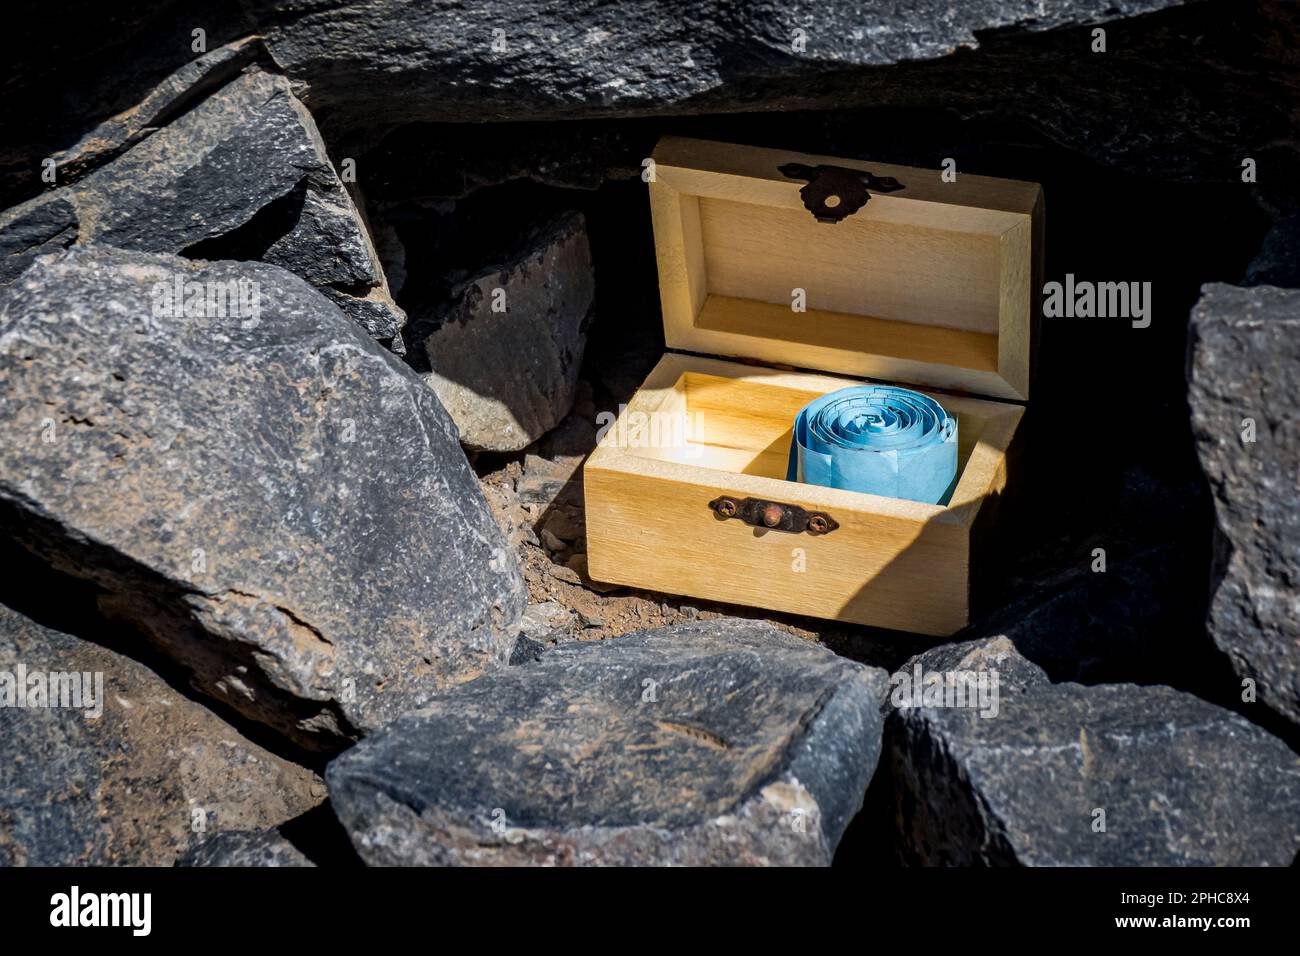 Close-up of a opened wooden geocaching treasure chest with a blue rolled logbook sits hidden inside a small hole among black stones. Stock Photo